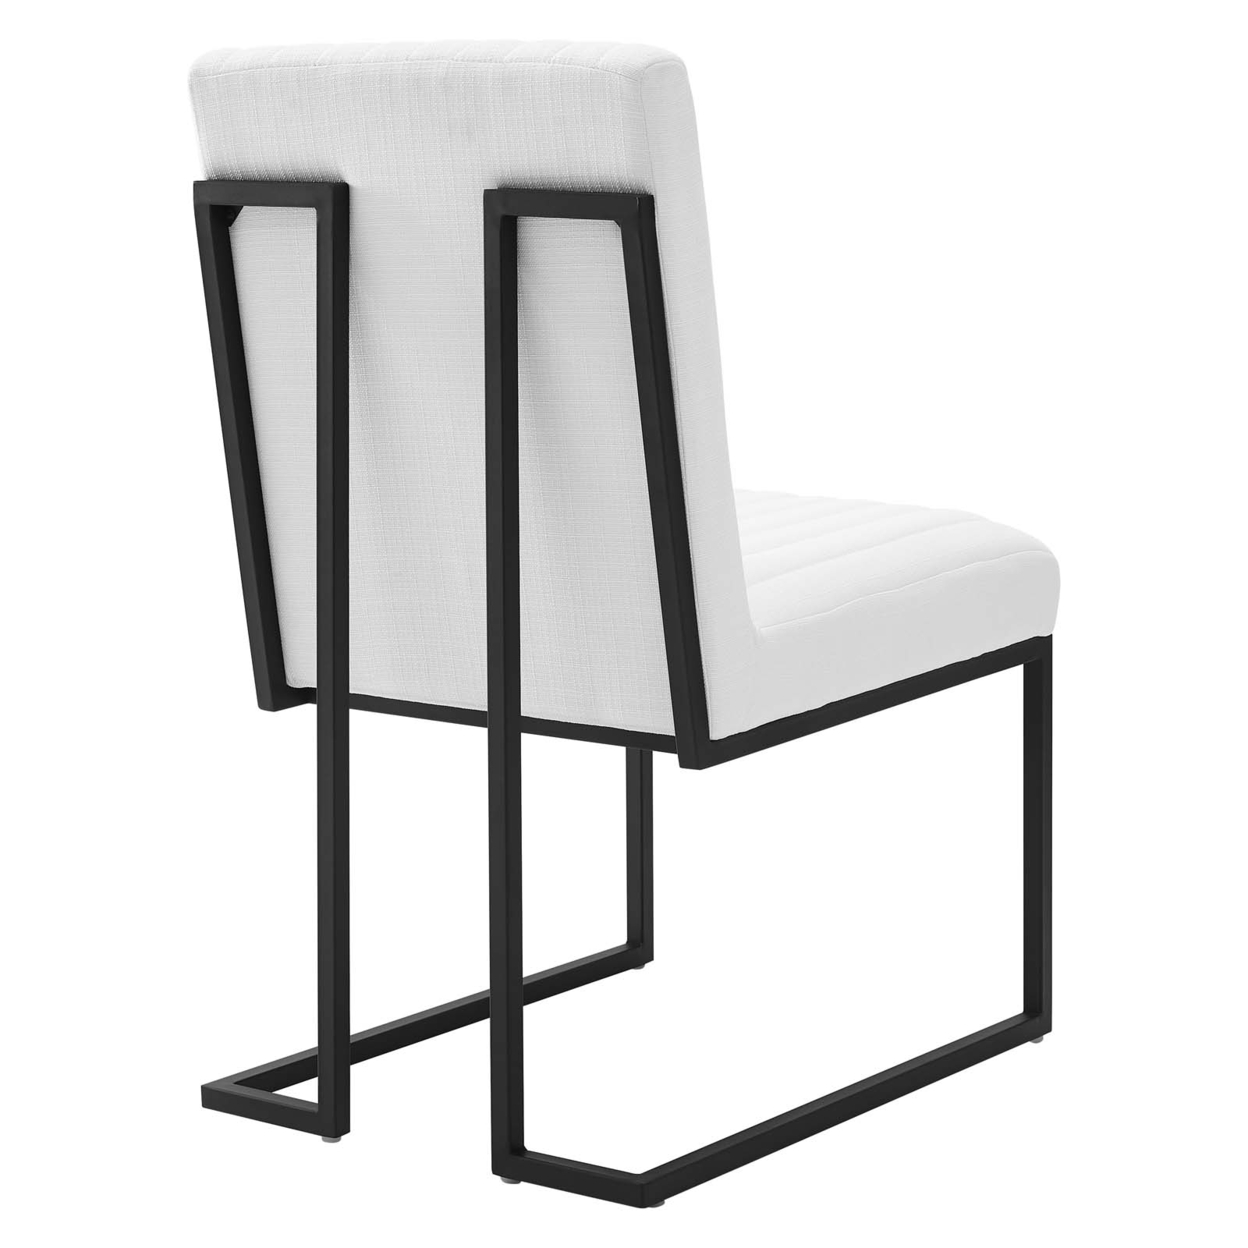 Indulge Channel Tufted Fabric Dining Chair, White